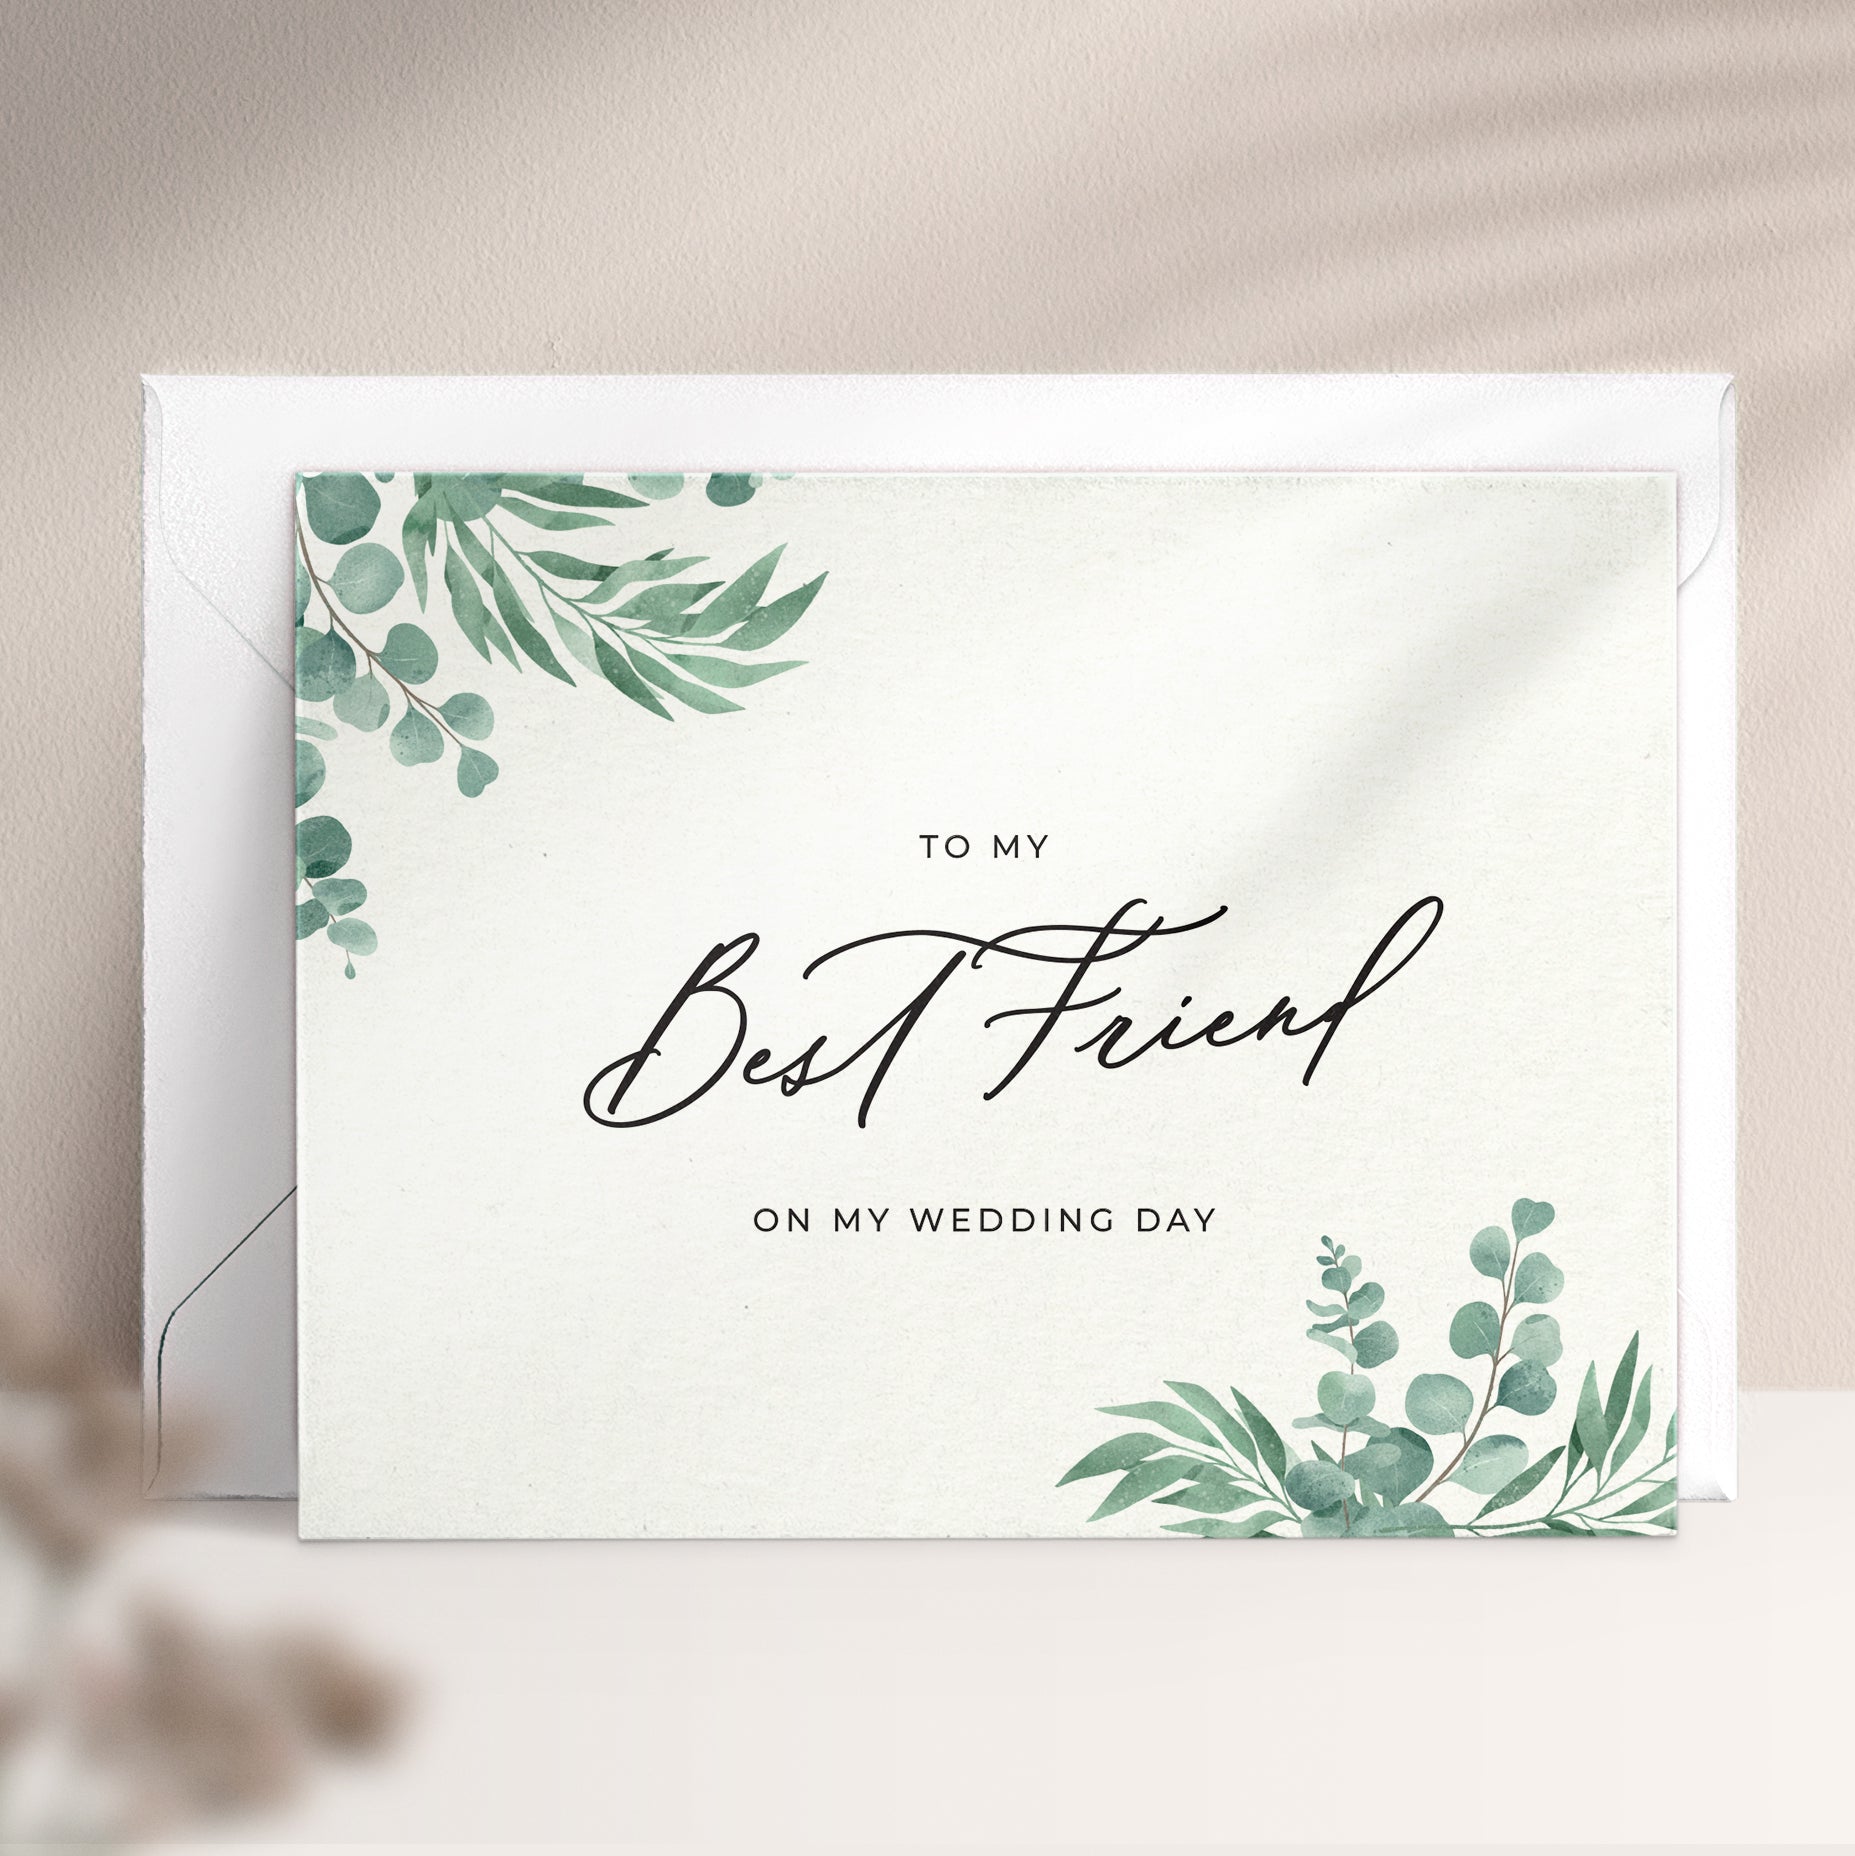 To my best friend on my wedding day note card in greenery design with eucalyptus leaves and calligraphy font from XOXOKristen.